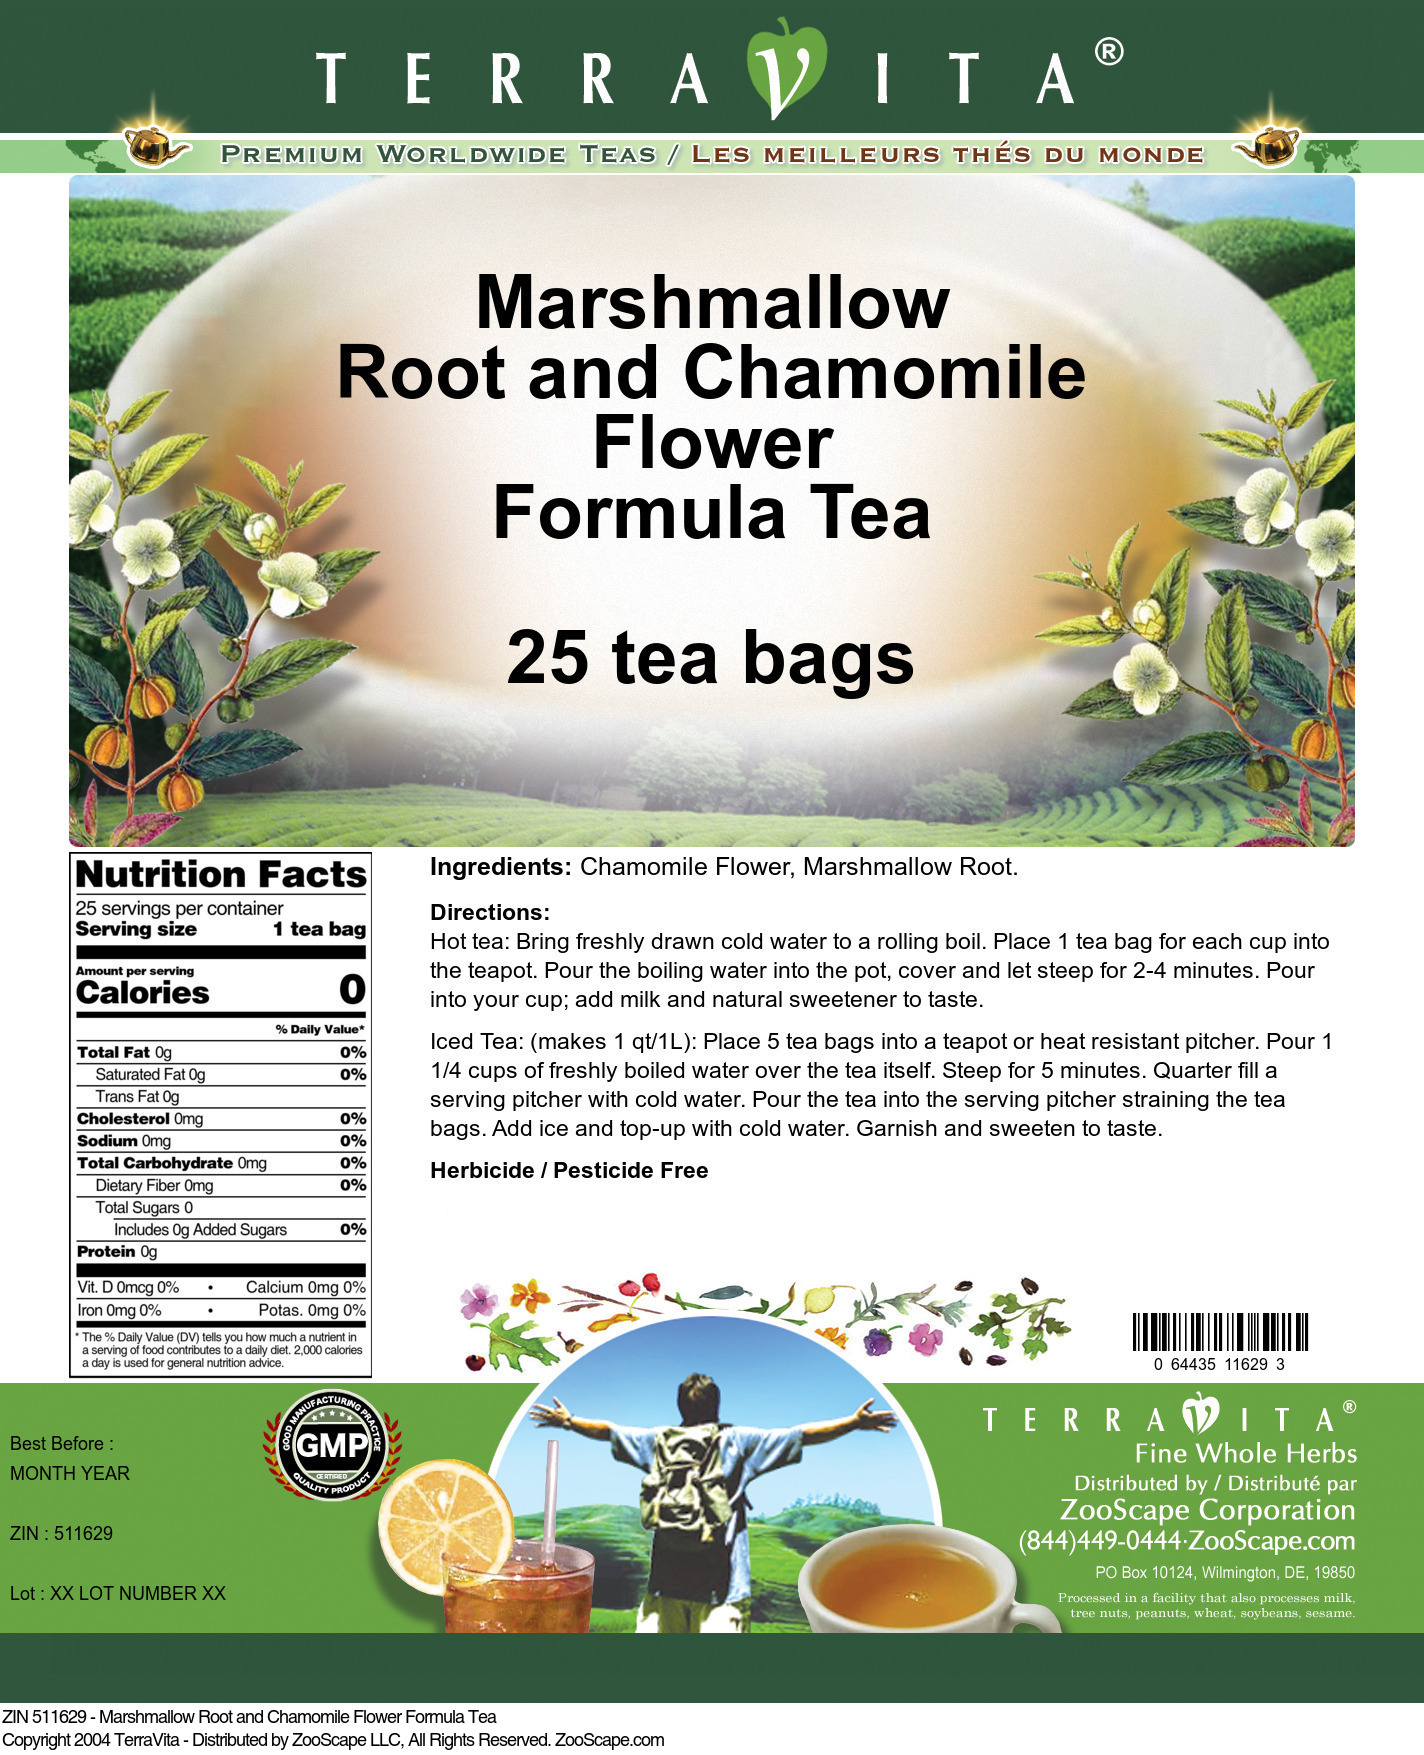 Marshmallow Root and Chamomile Flower Formula Tea - Label